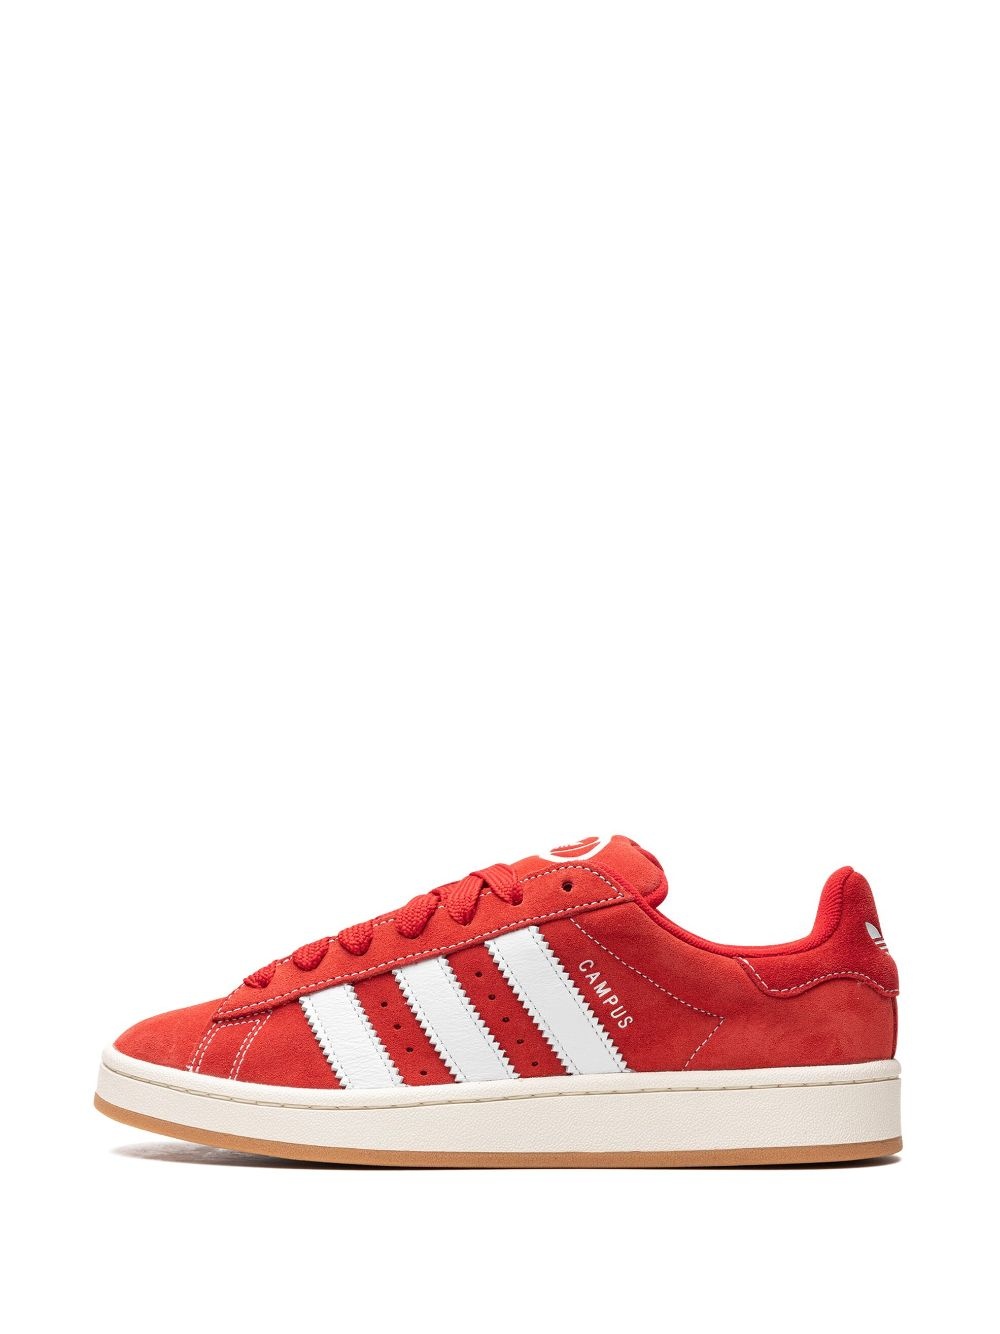 Campus 00s "Better Scarlet/Cloud White" sneakers - 5